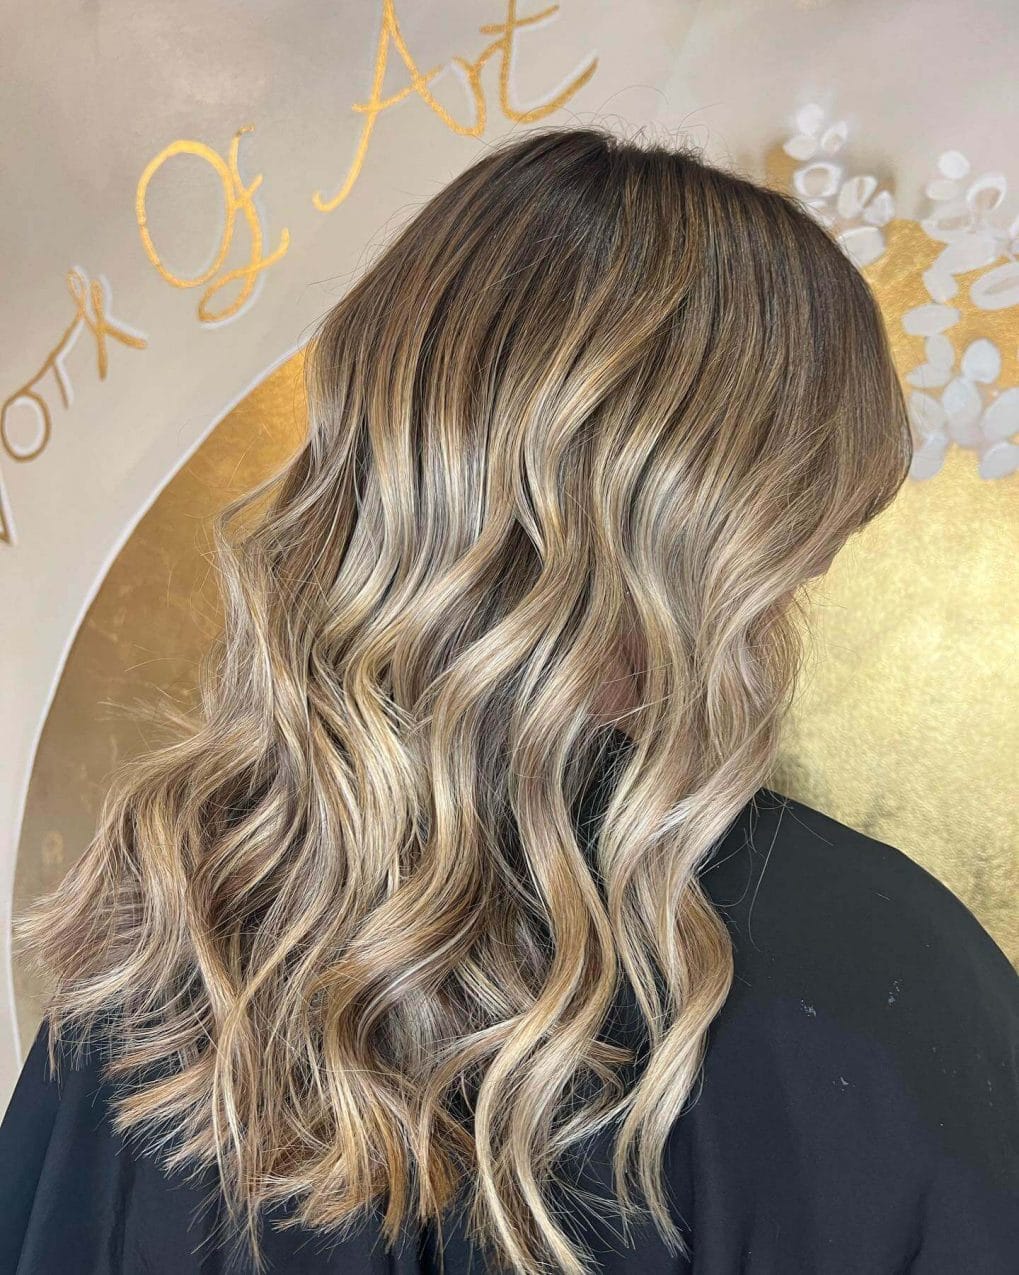 Dynamic blend from brunette to icy blonde, reminiscent of a frosty winter morning.